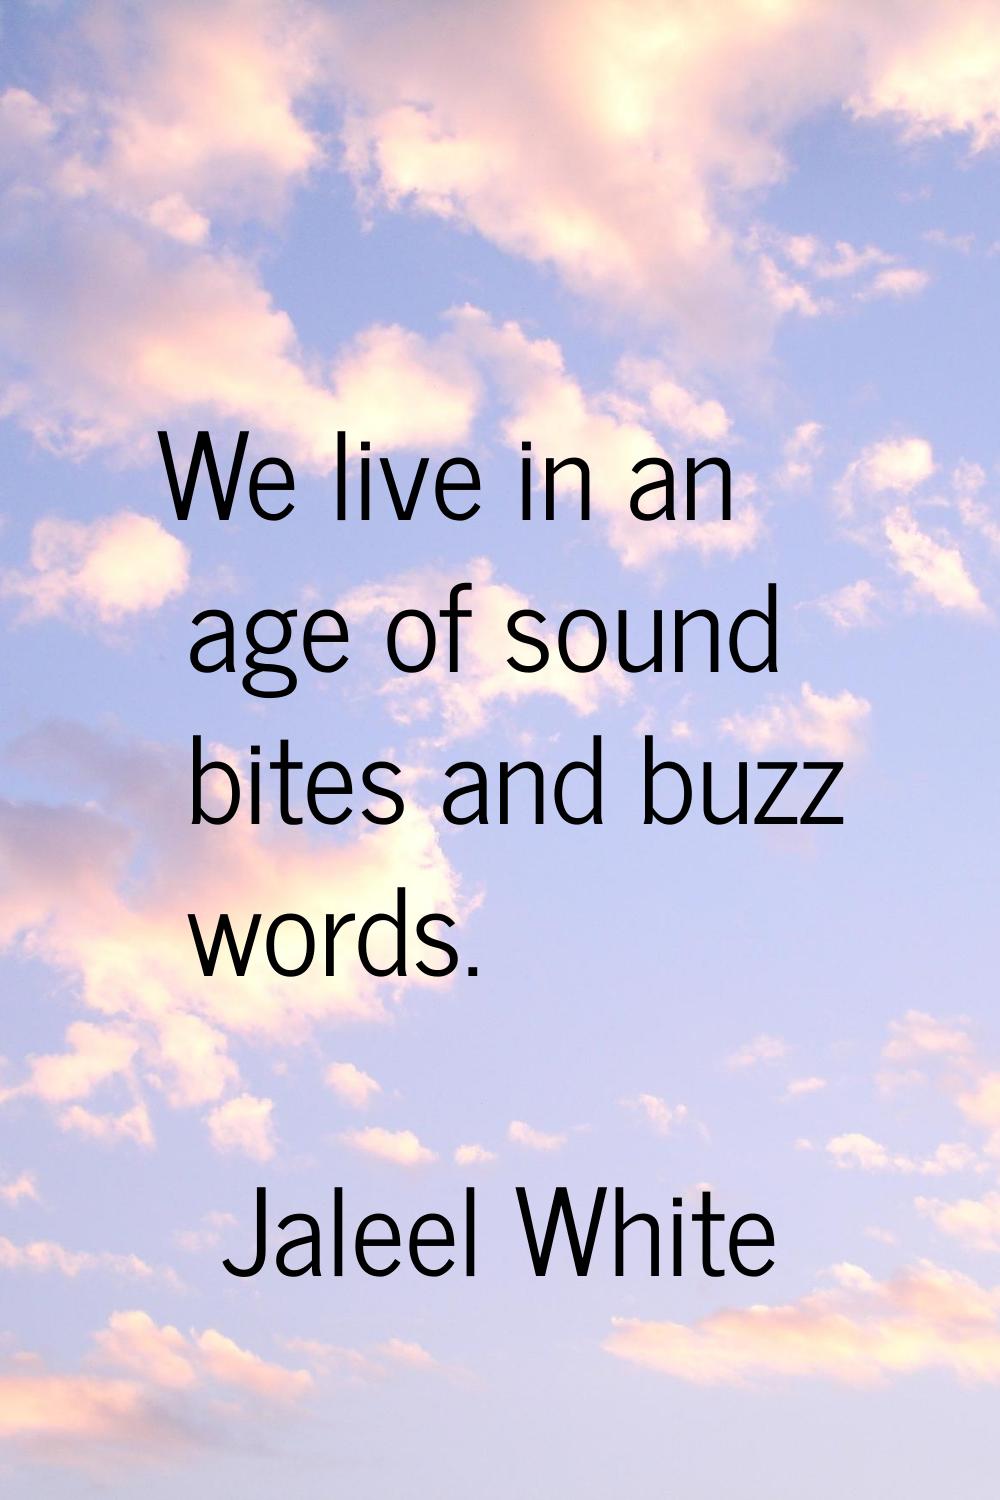 We live in an age of sound bites and buzz words.